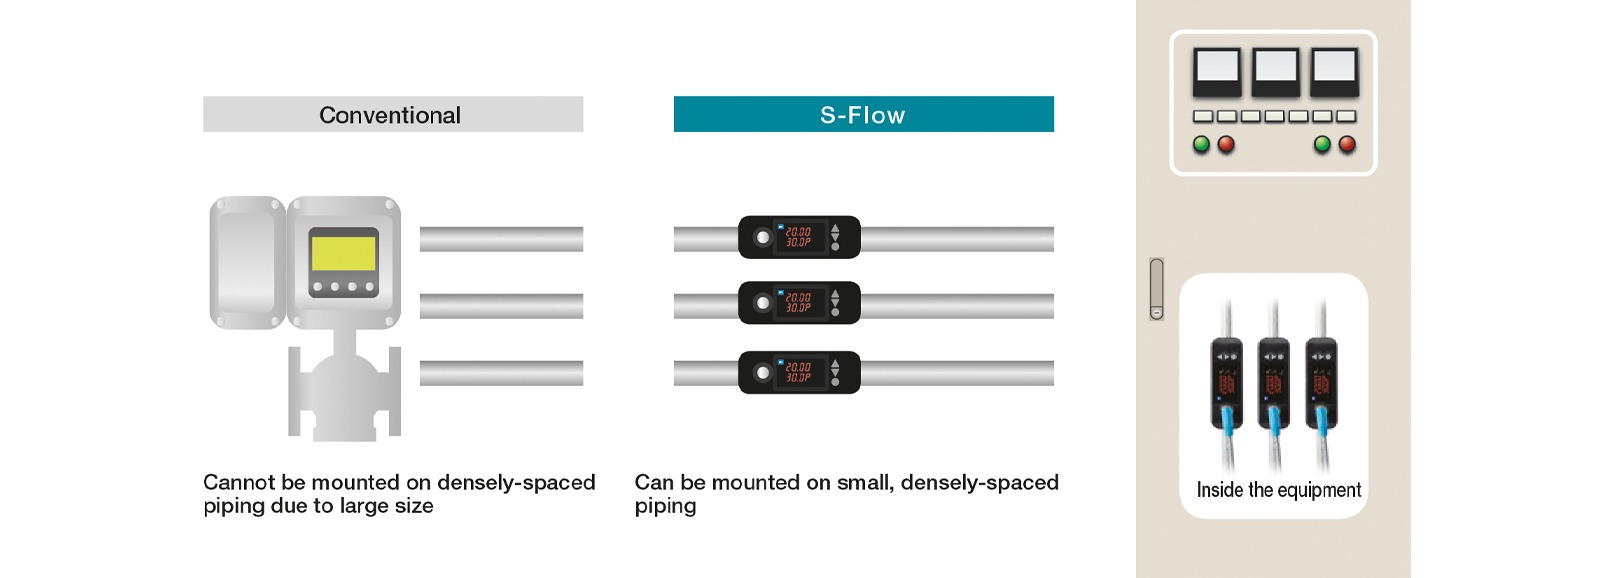 how do integral ultrasonic flowmeters such as S-Flow meet the challenges posed by small pipes?